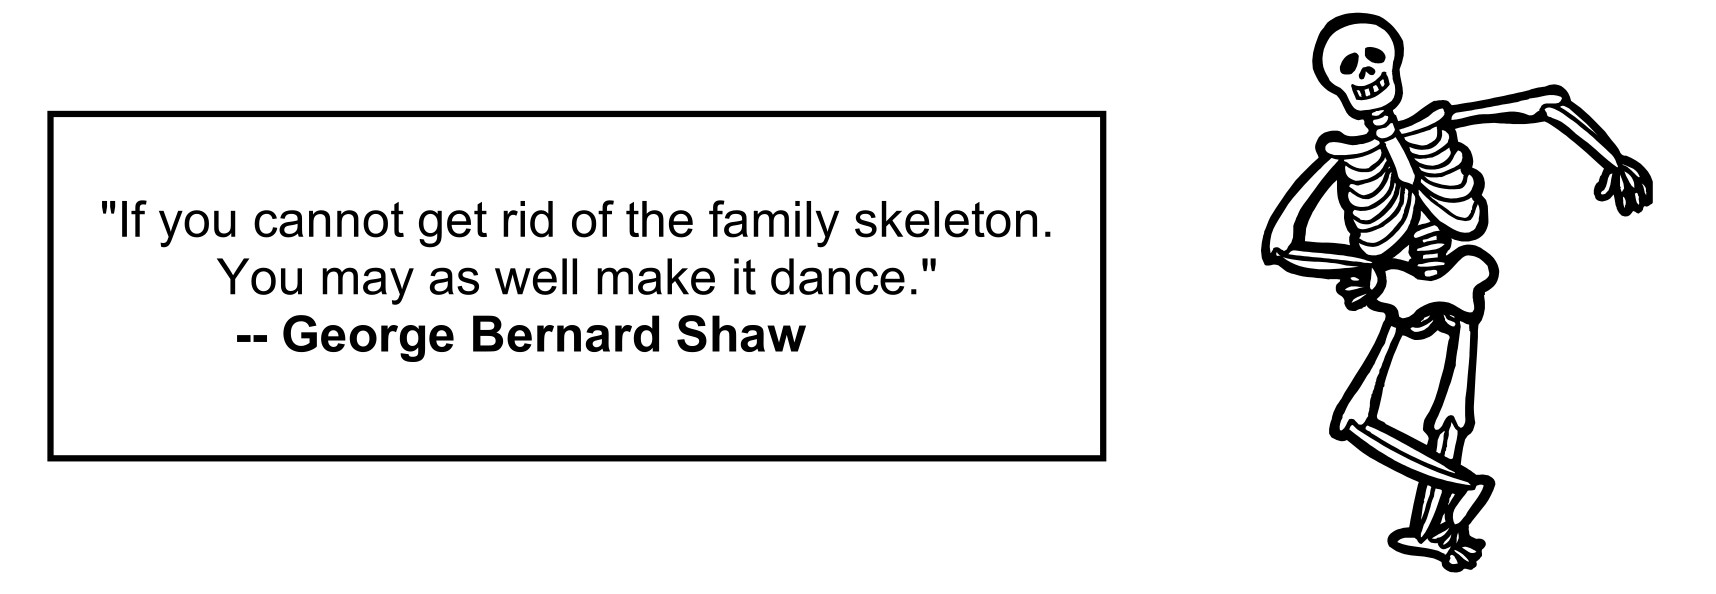 "If you cannot get rid of the family skeleton. You may as well make it dance." - George Bernard Shaw